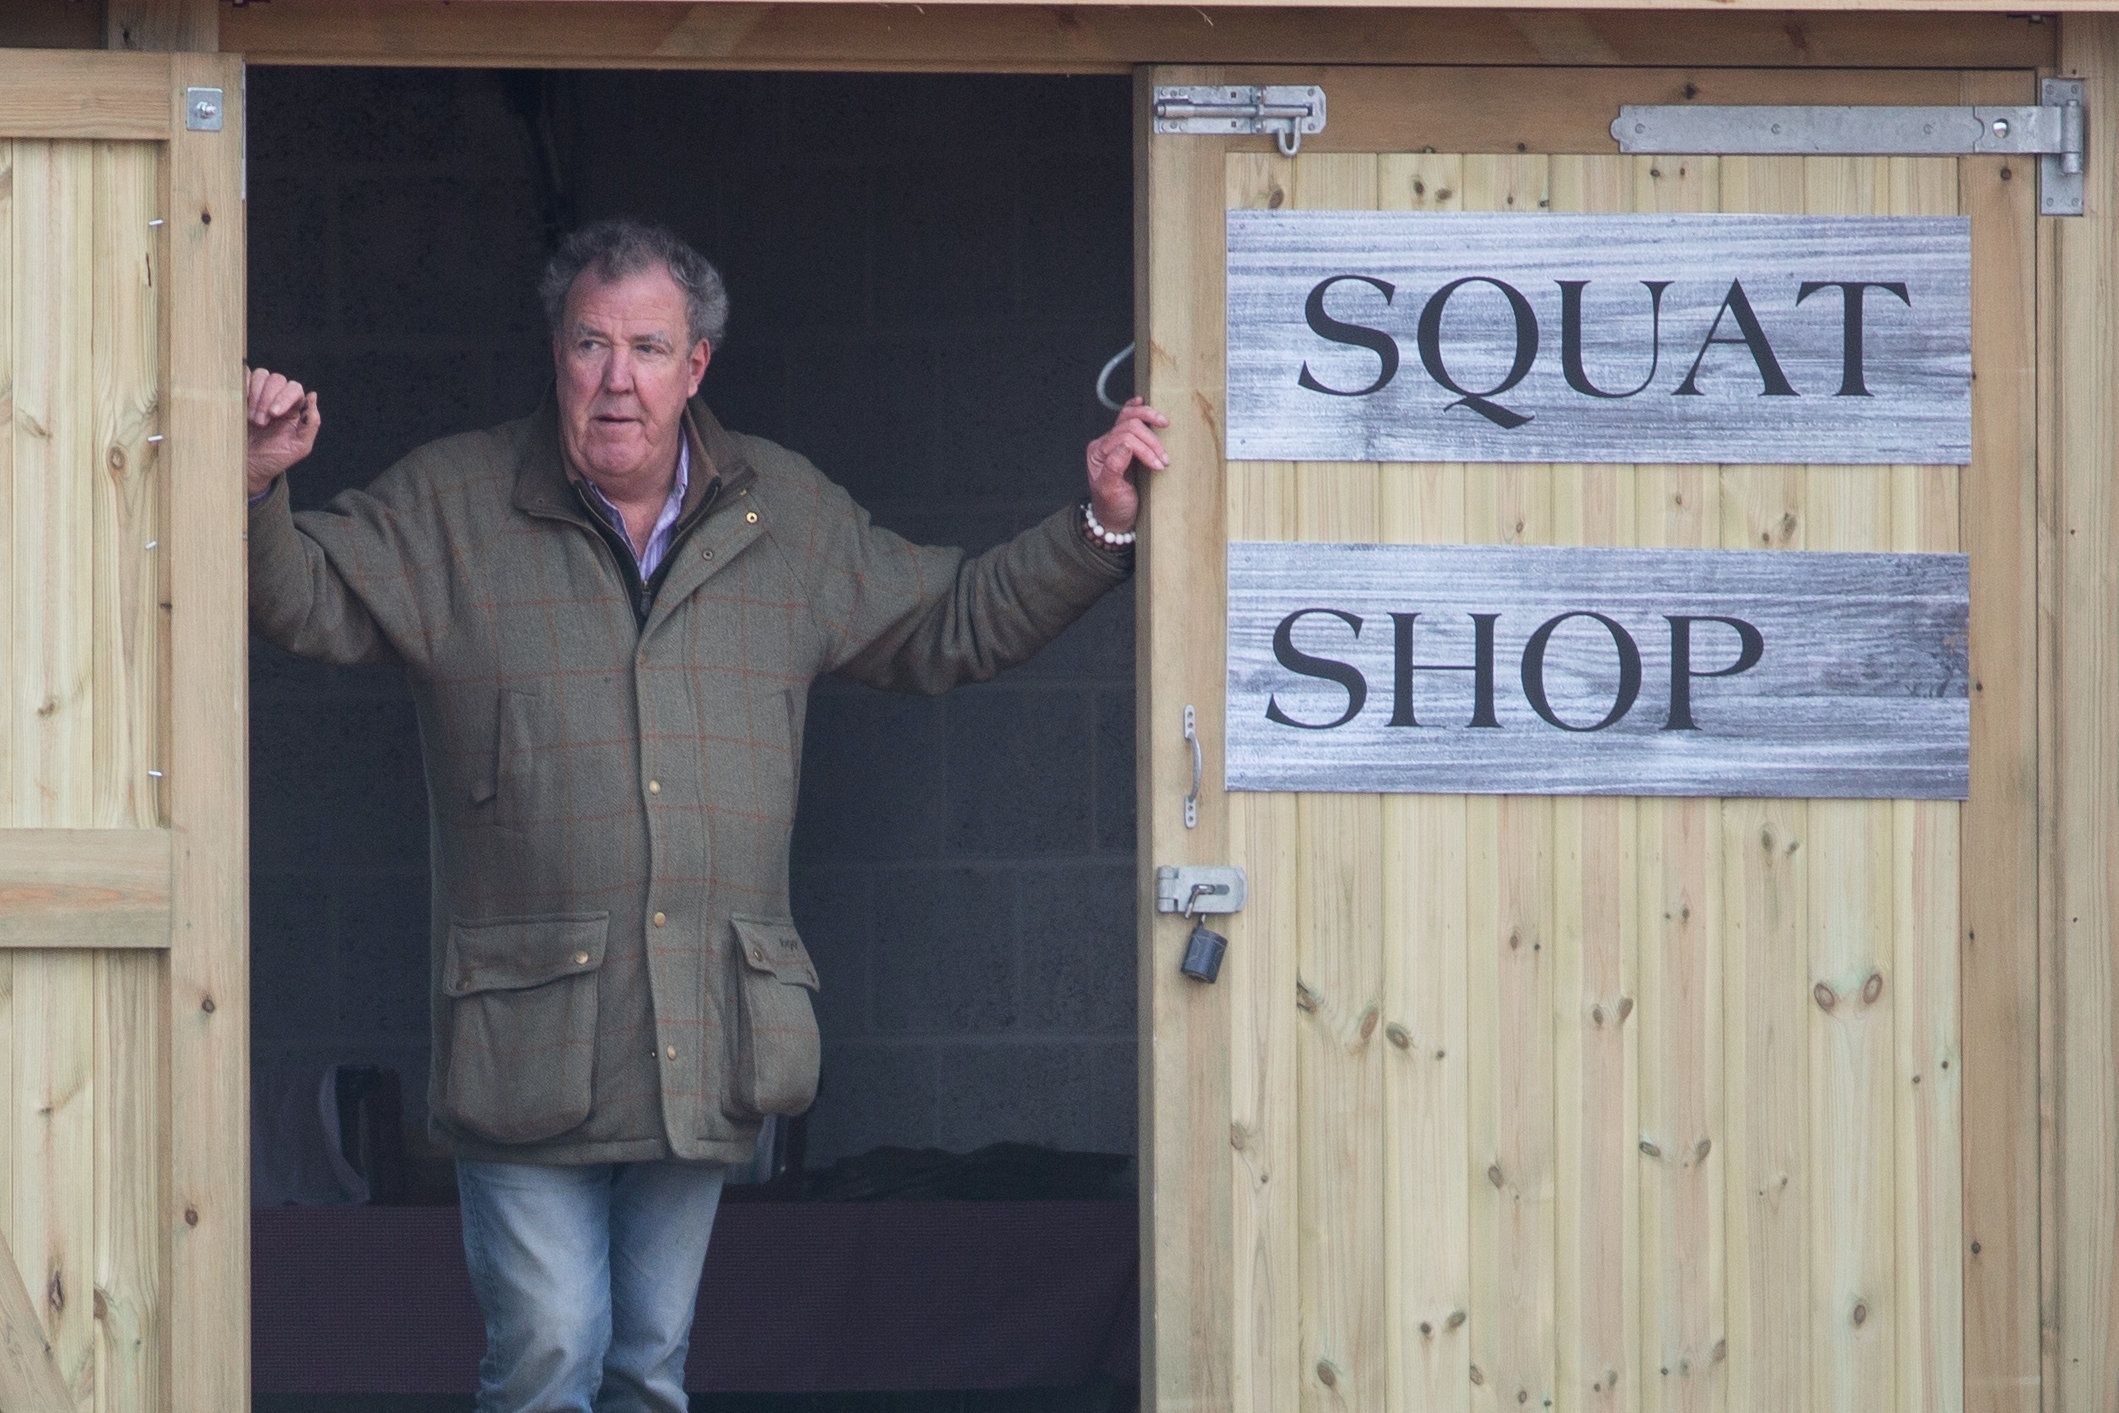 Jeremy Clarkson can’t wait to see Meghan Markle parade naked through the streets of Britain as people shout “Shame!”